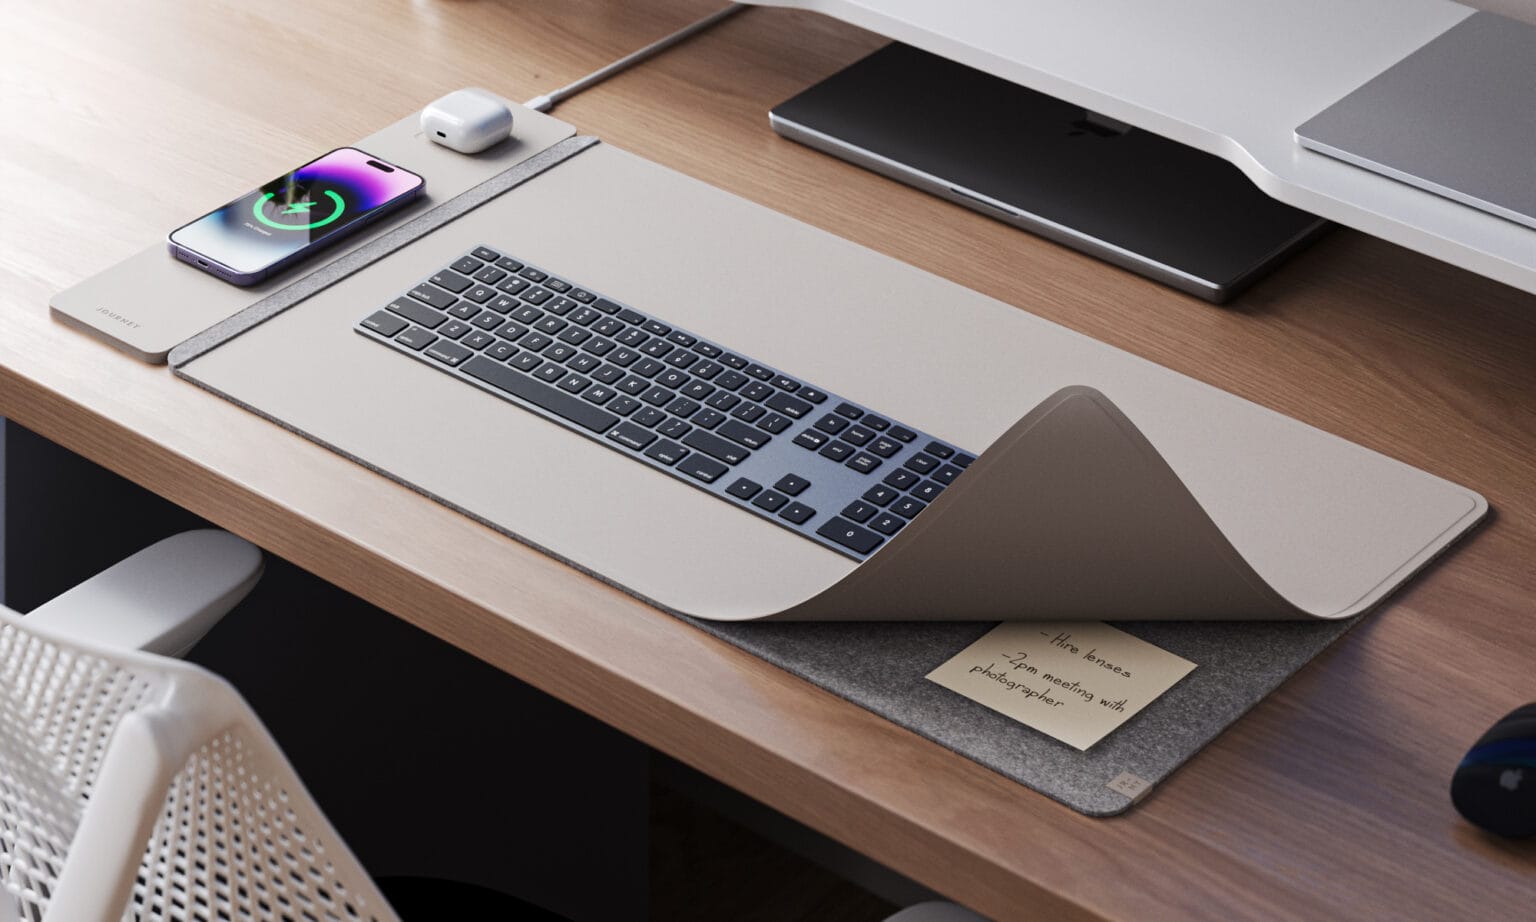 The desk mat's charging panel is a convenient place to top off your smartphone and earbuds charging case.